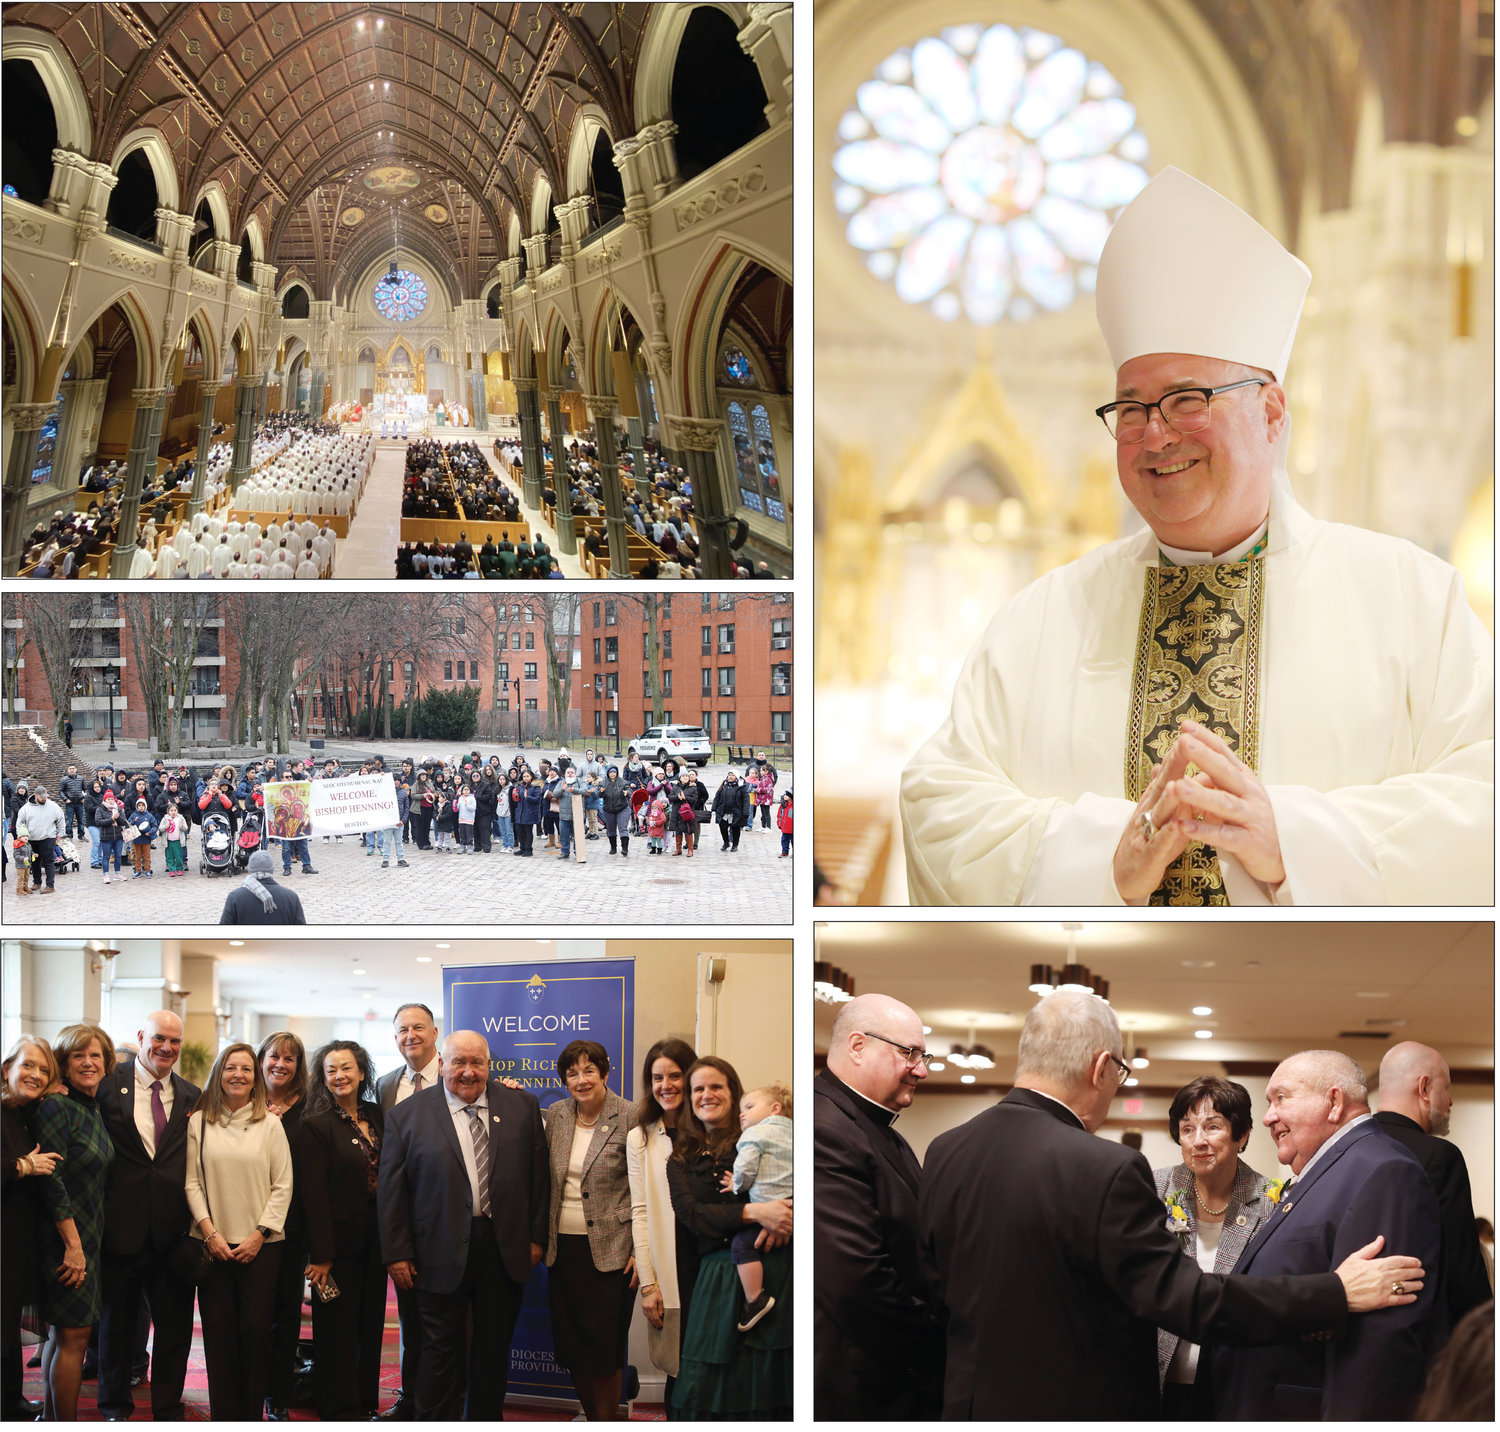 Clockwise, from top right: Bishop Henning beams with joy during his Mass of Reception; Bishop Thomas J. Tobin, with Coadjutor Bishop Richard G. Henning to his left, greets the bishop’s parents, Richard and Maureen Henning; Henning family members from Long Island and Florida gather for a photo at the Omni Providence before a pre-Mass luncheon; a Spanish-speaking group from Boston applauds Bishop Henning; a full cathedral for the Mass of Reception.